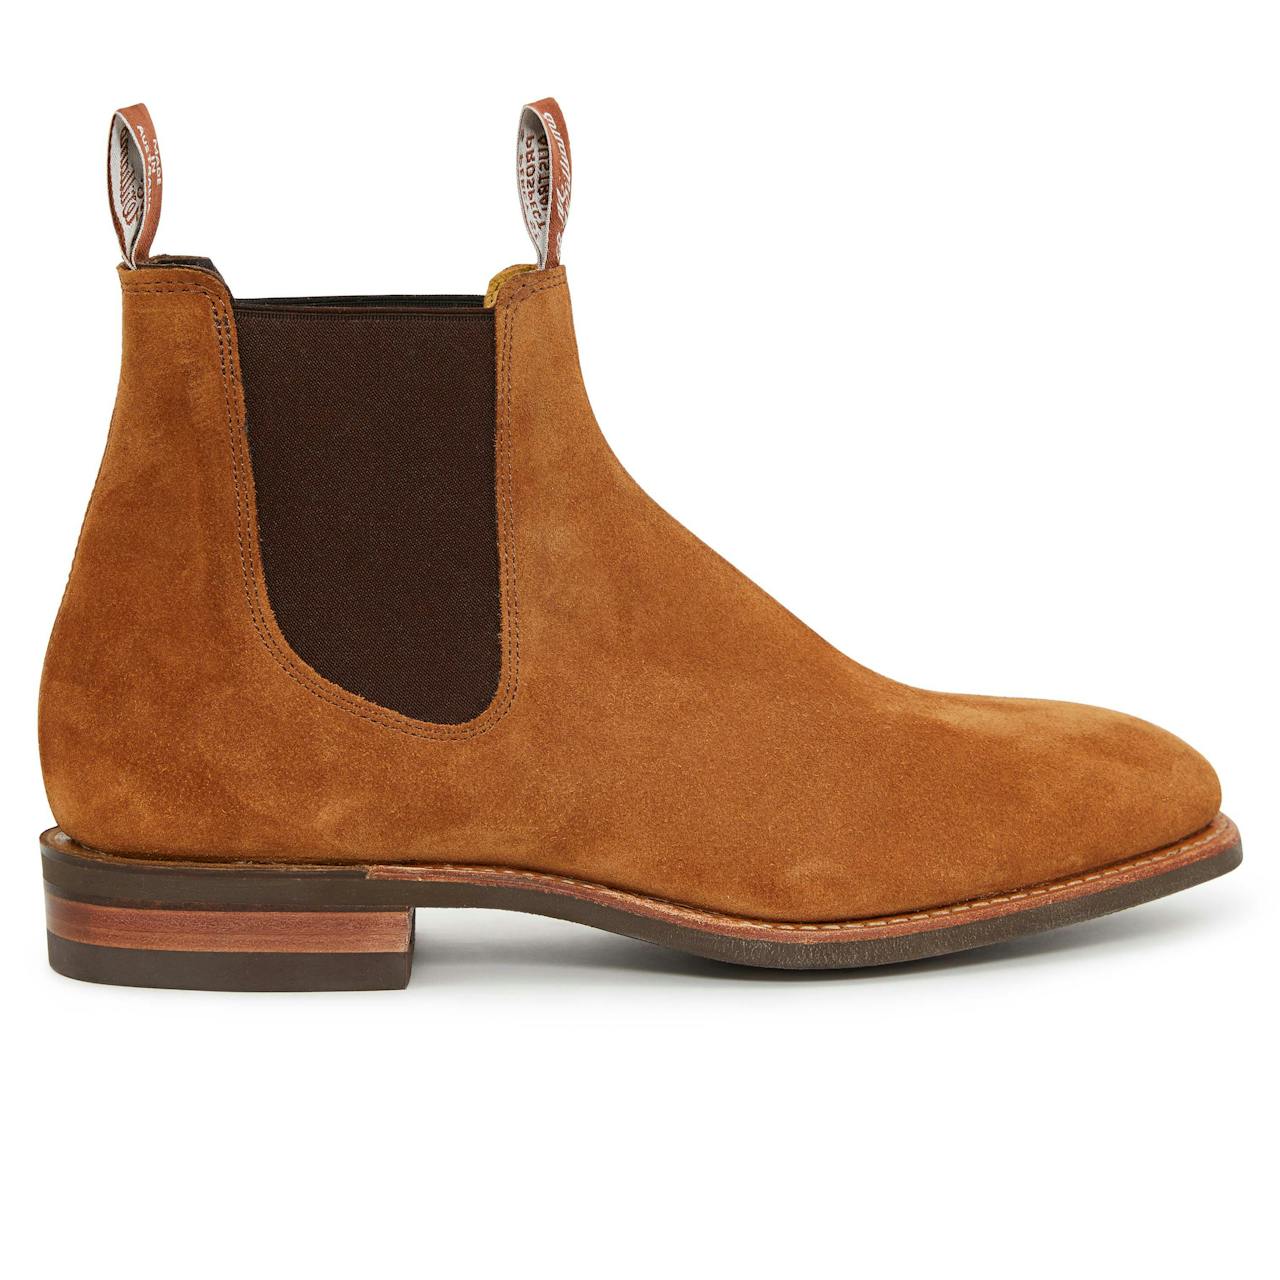 RM Williams Suede Comfort Craftsman Boots- A Hume